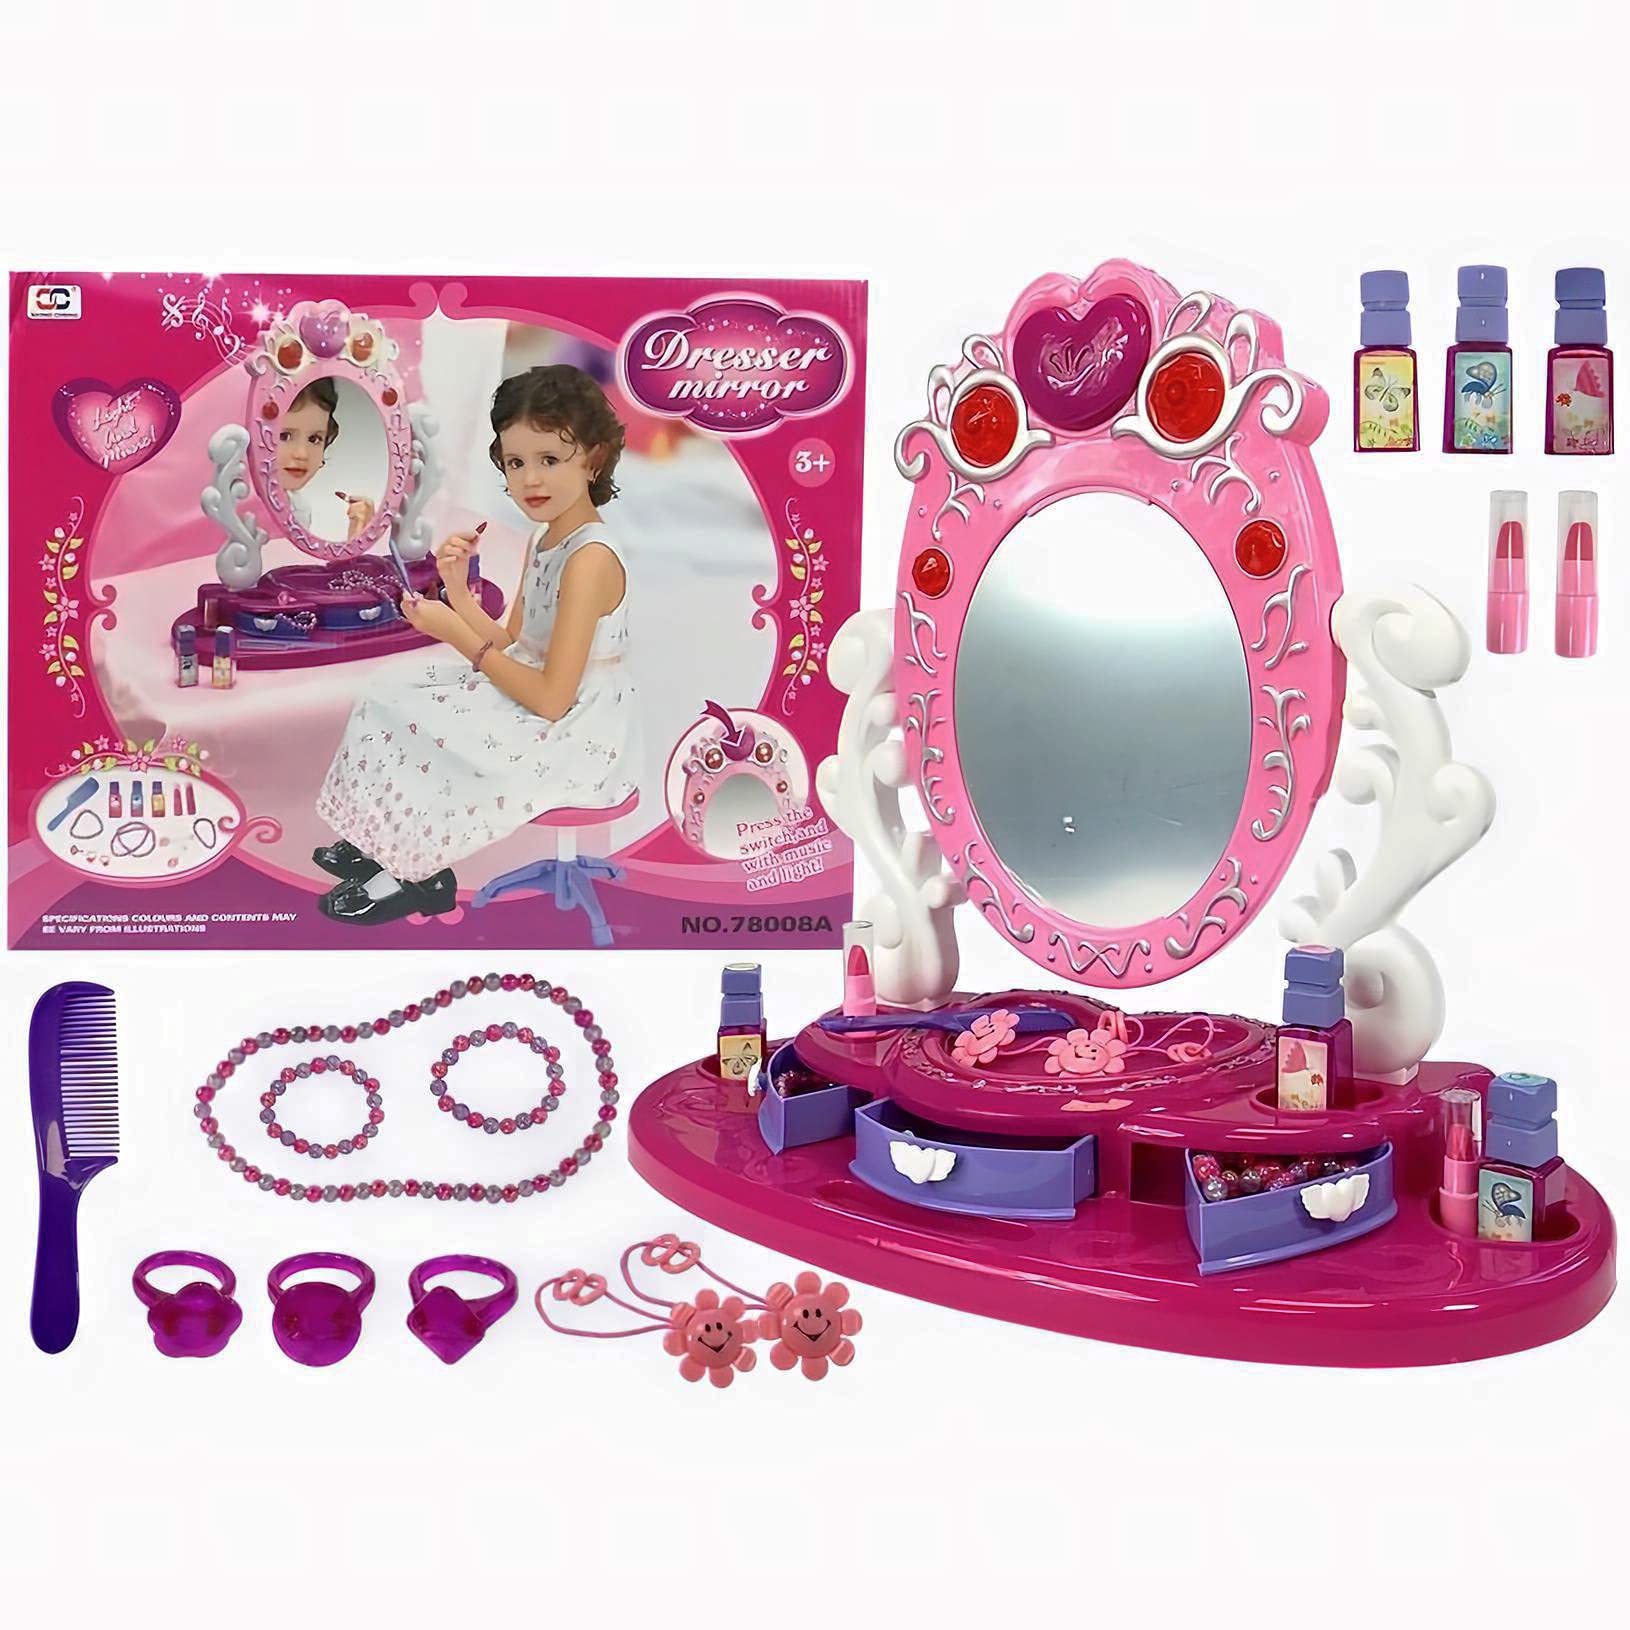 Dresser Vanity Beauty Set - Pink Princess Pretend Play Dressing Table Top Set with Makeup Mirror, Jewelry and Accessories - Music and Lights for Little Girls